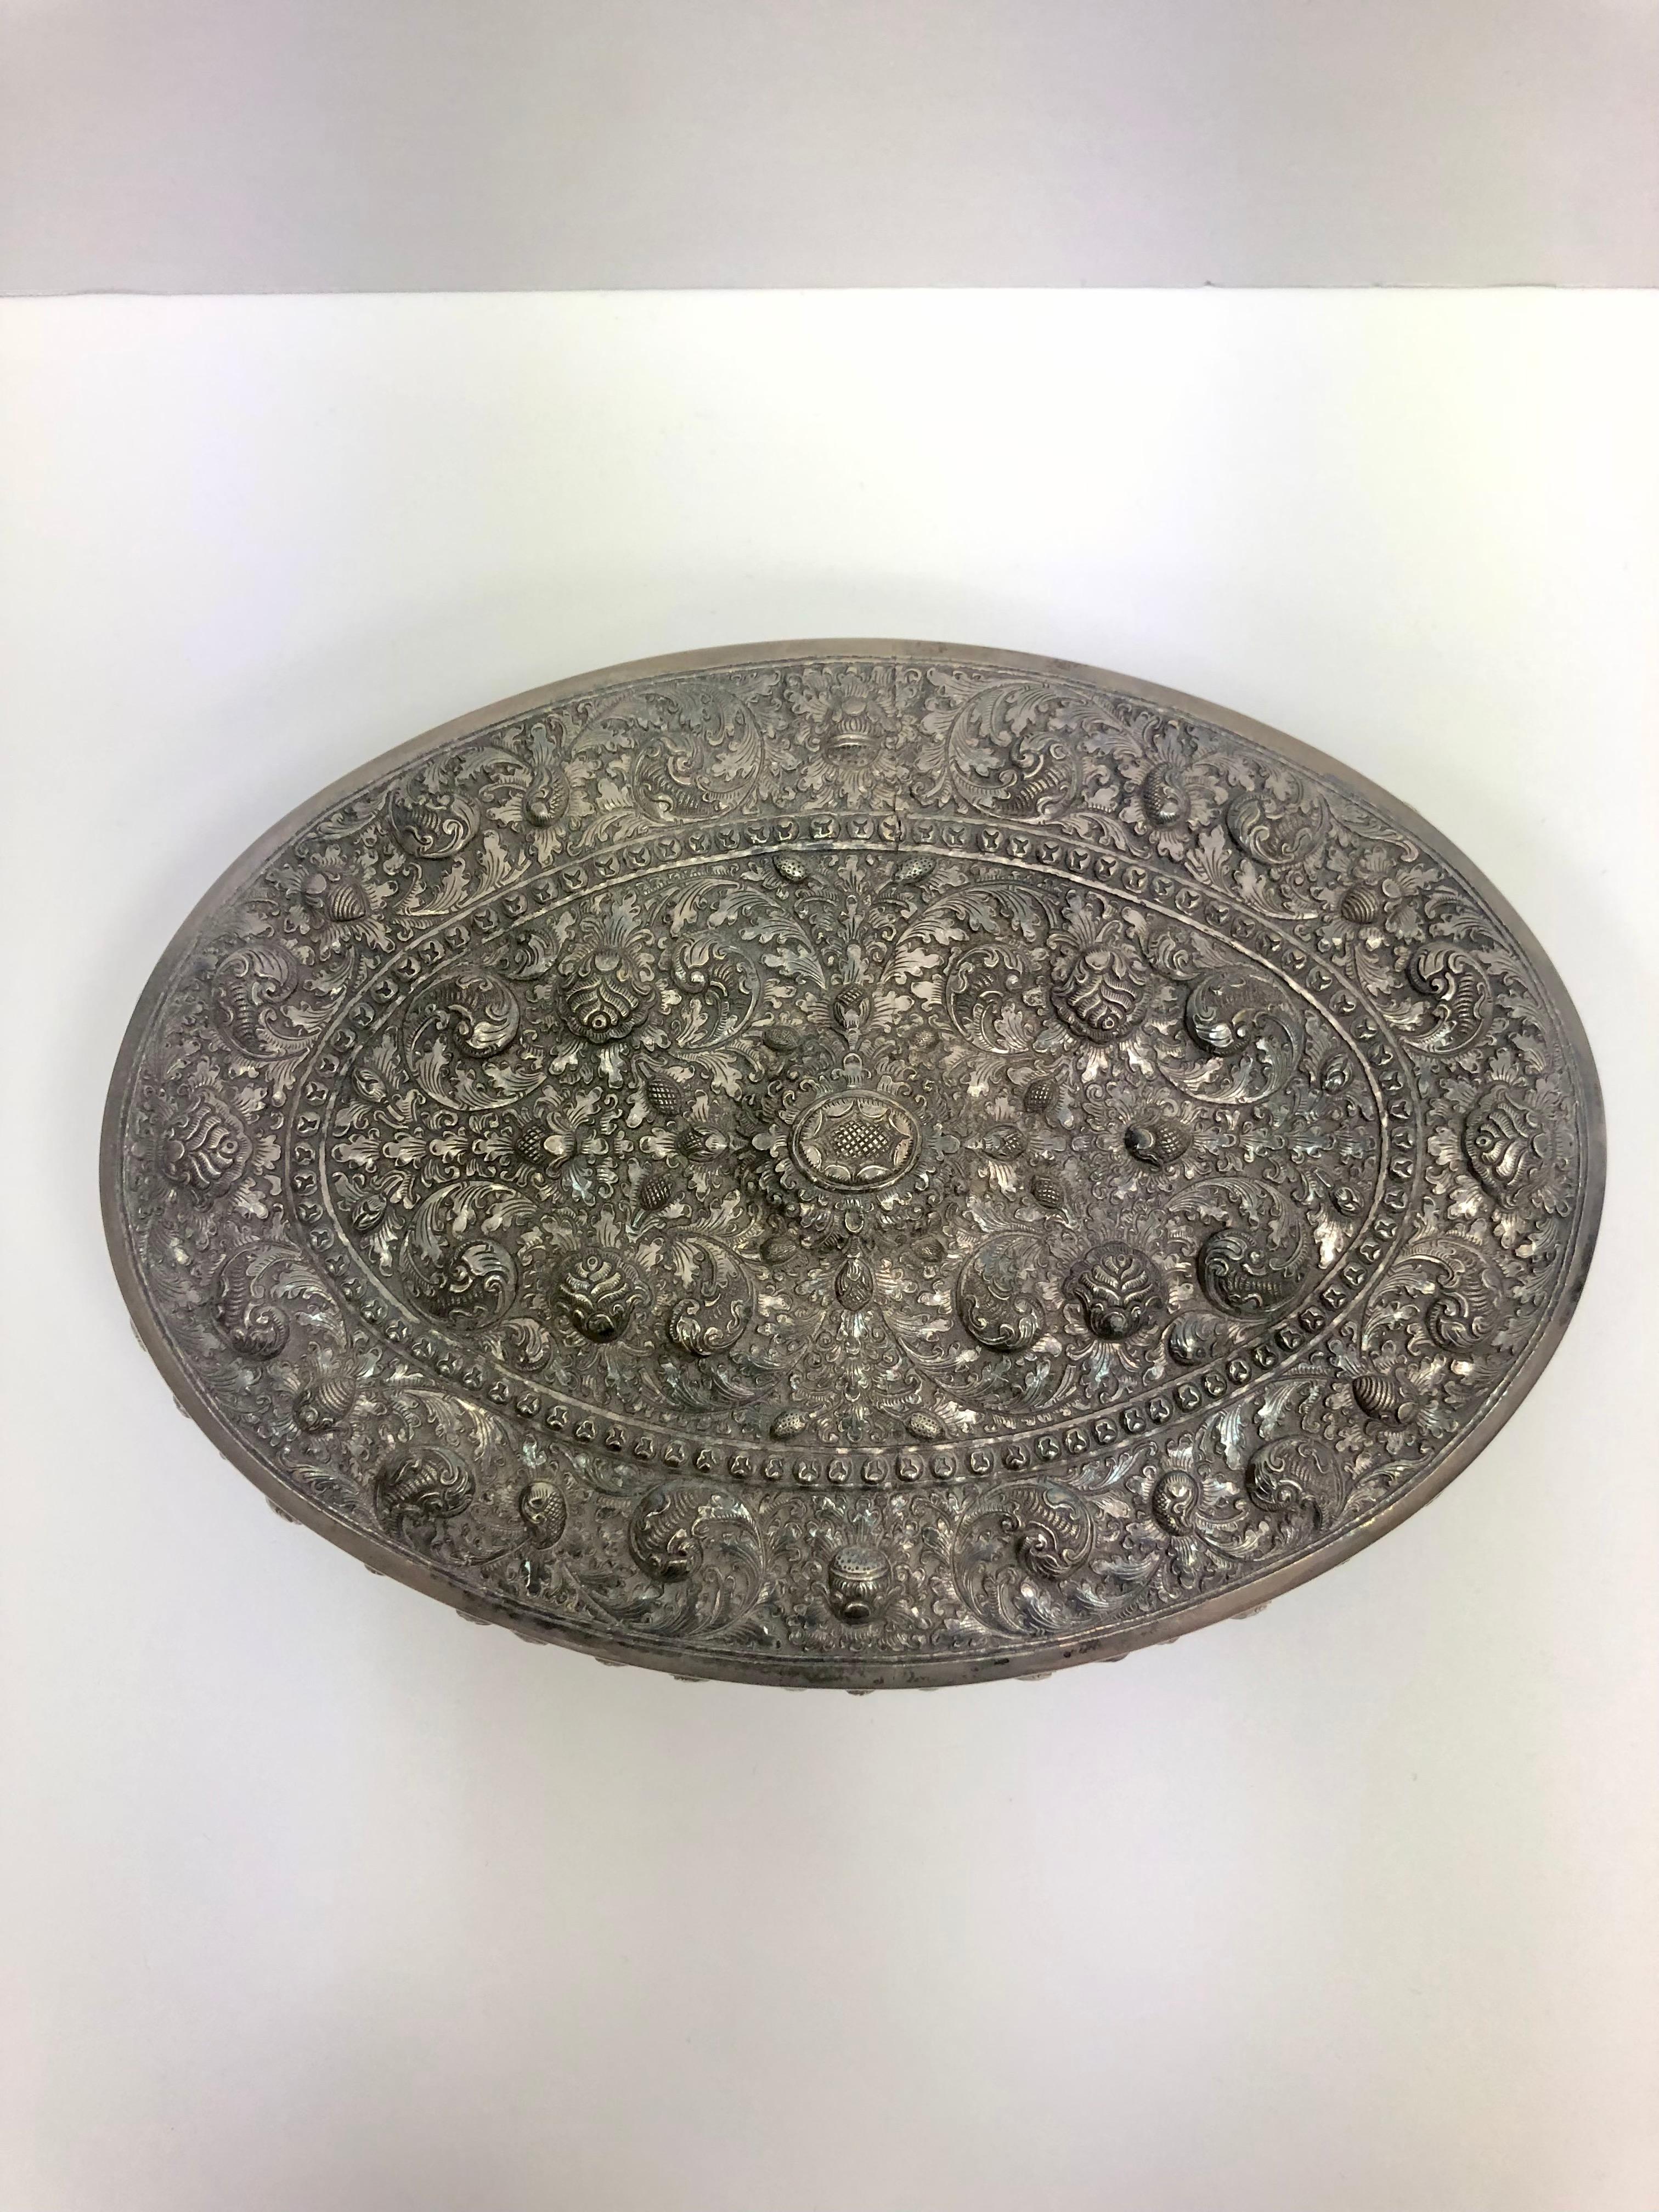 Ornate silver oval jewelry box with continental wood interior. Embossed ornate design and raised detail. Made with Egyptian 900 silver. 
Can be used as a jewelry, keepsake, trinket, vanity box. Made in Cambodia 1890. Marked Bounthan Cambodge T900.